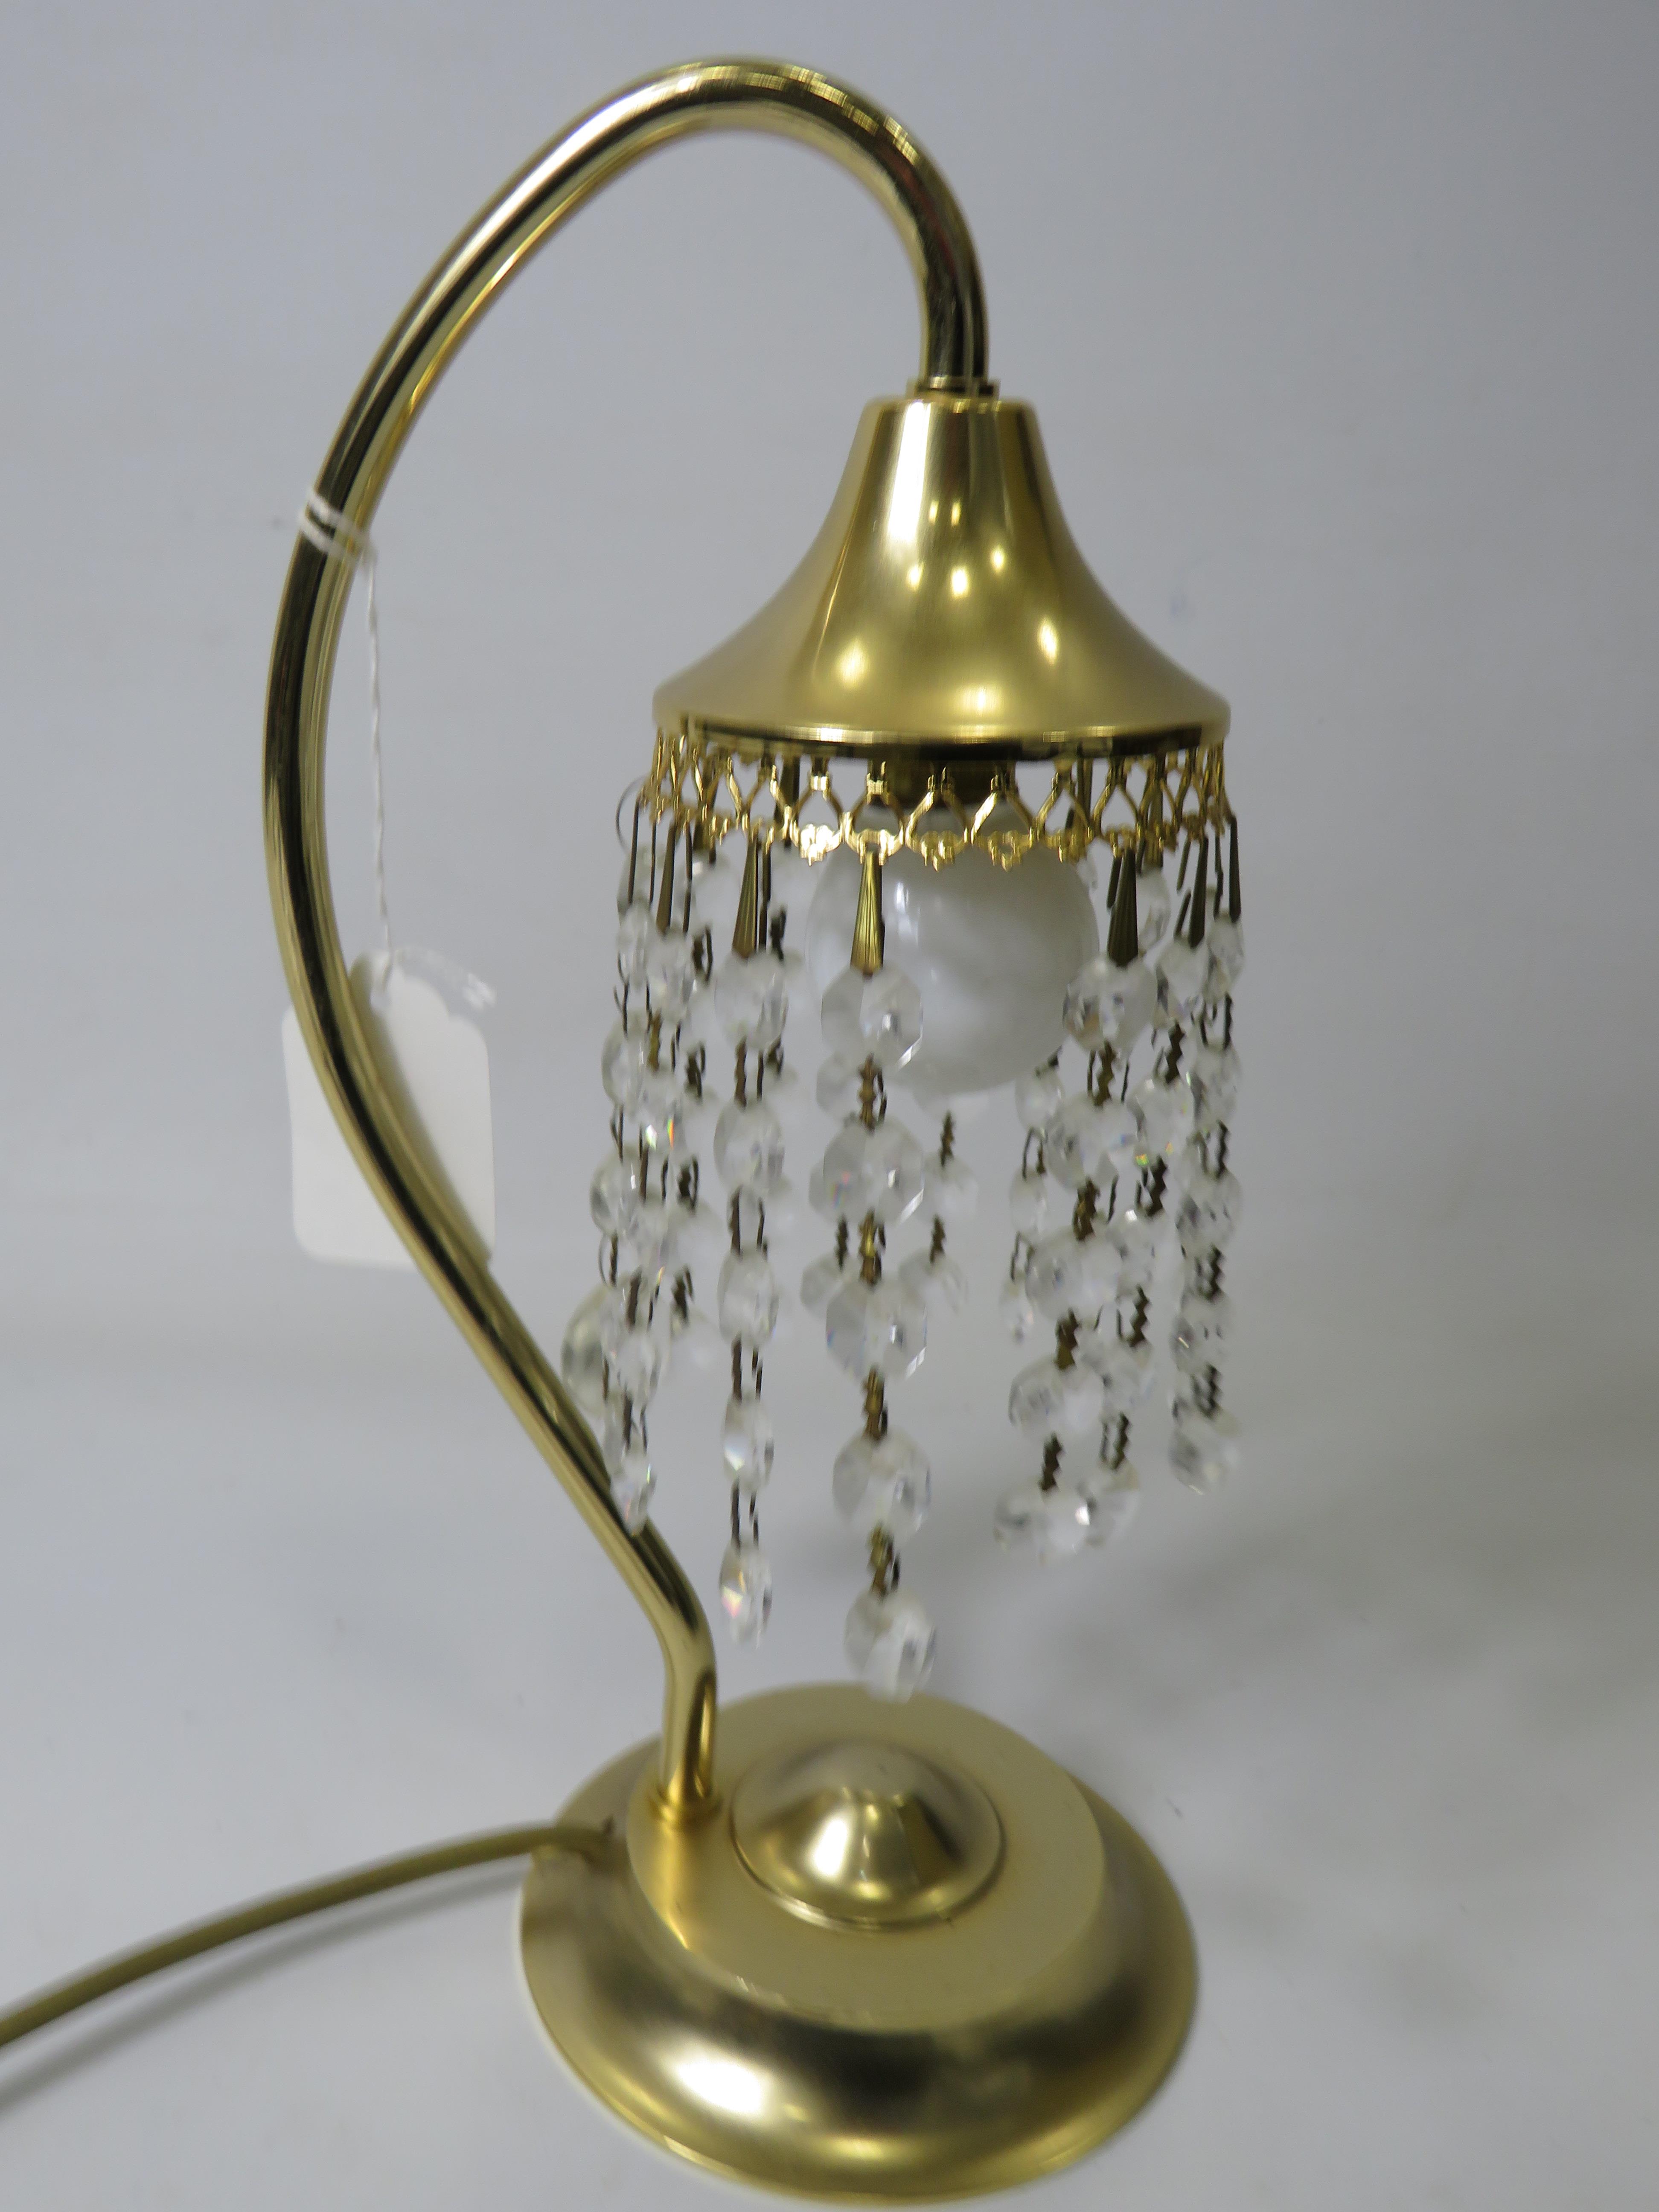 Brushed metal brass effect Standard lamp with 9 Candle bulbs and hanging glass lustres. Approx 67 in - Image 7 of 7